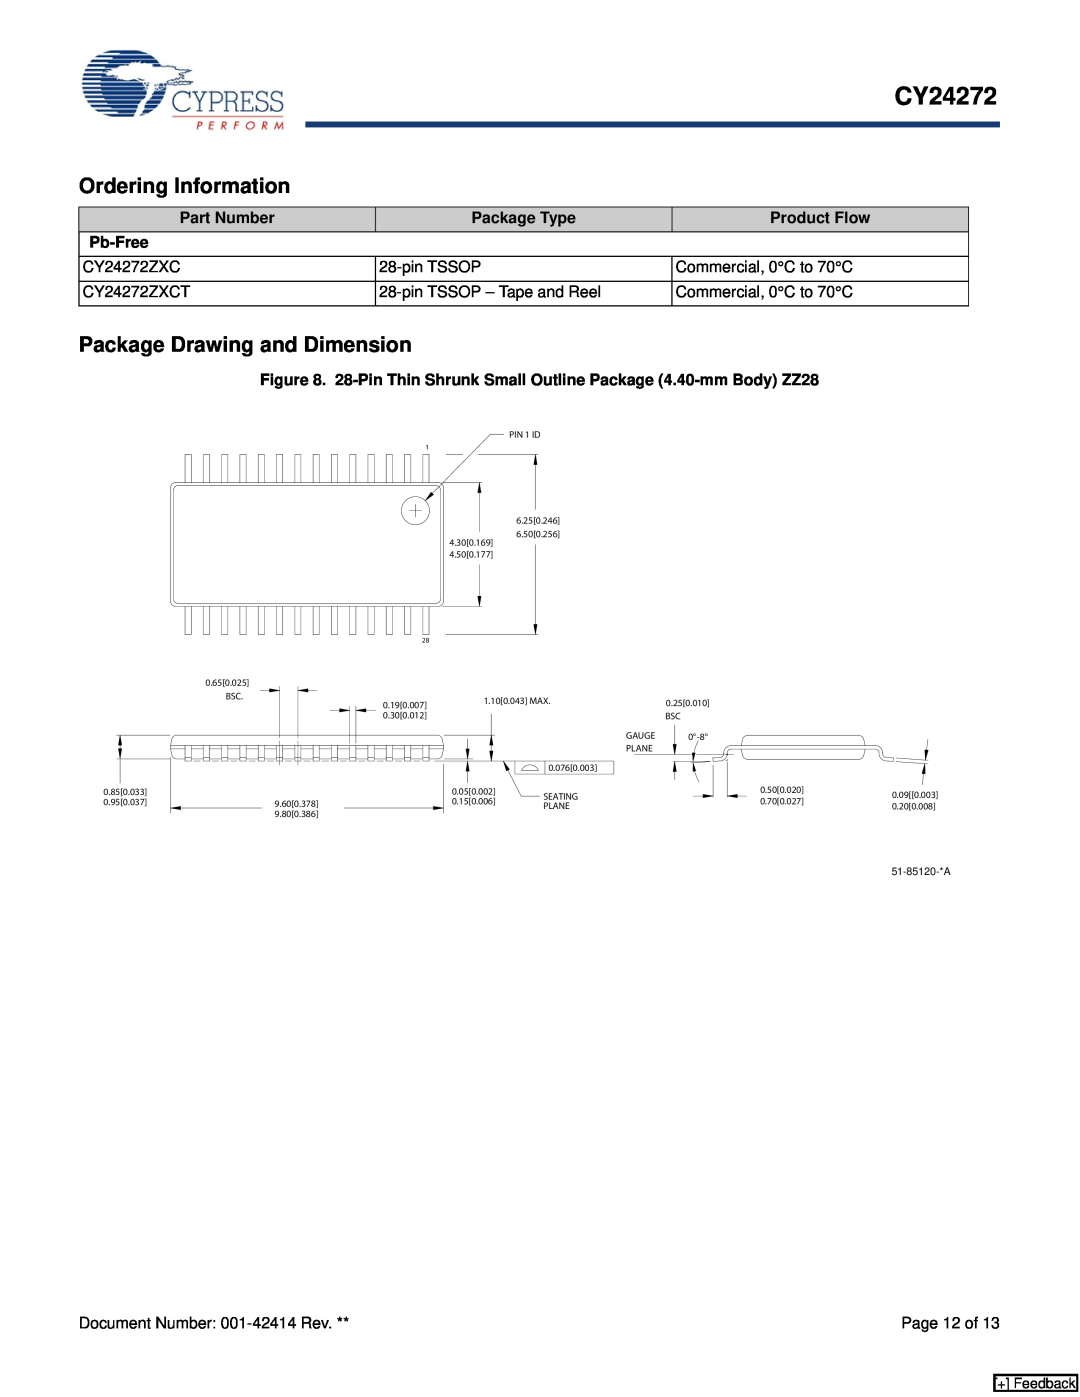 Cypress CY24272 Ordering Information, Package Drawing and Dimension, Part Number, Package Type, Product Flow, Pb-Free 